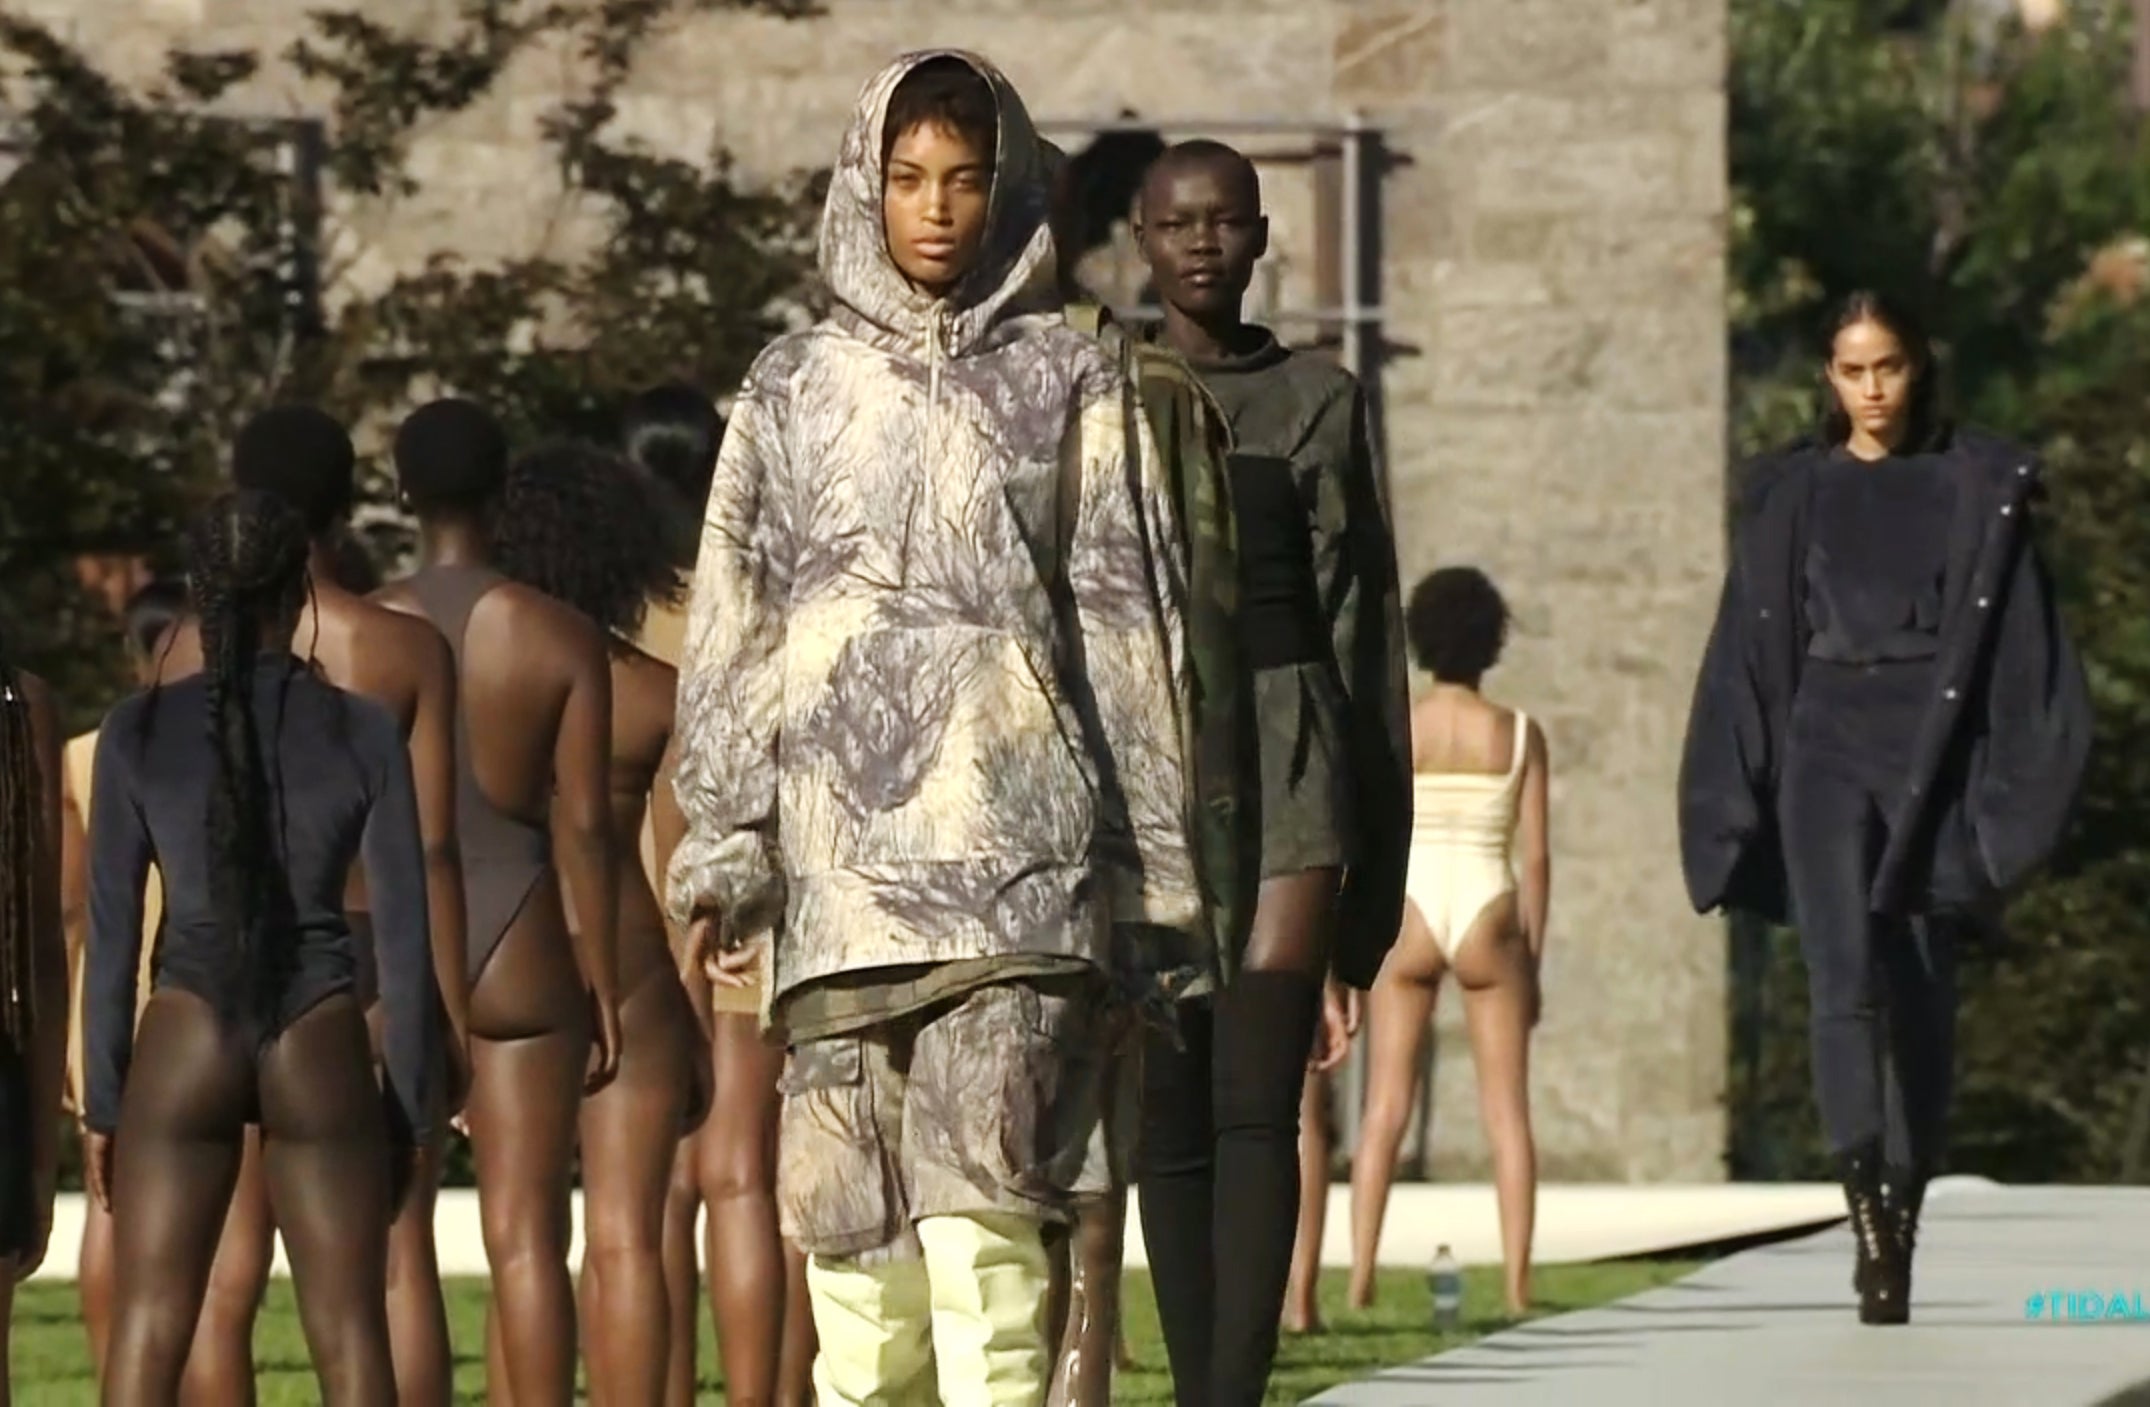 Kanye West's Yeezy Season 4 Show Had Black Models After All